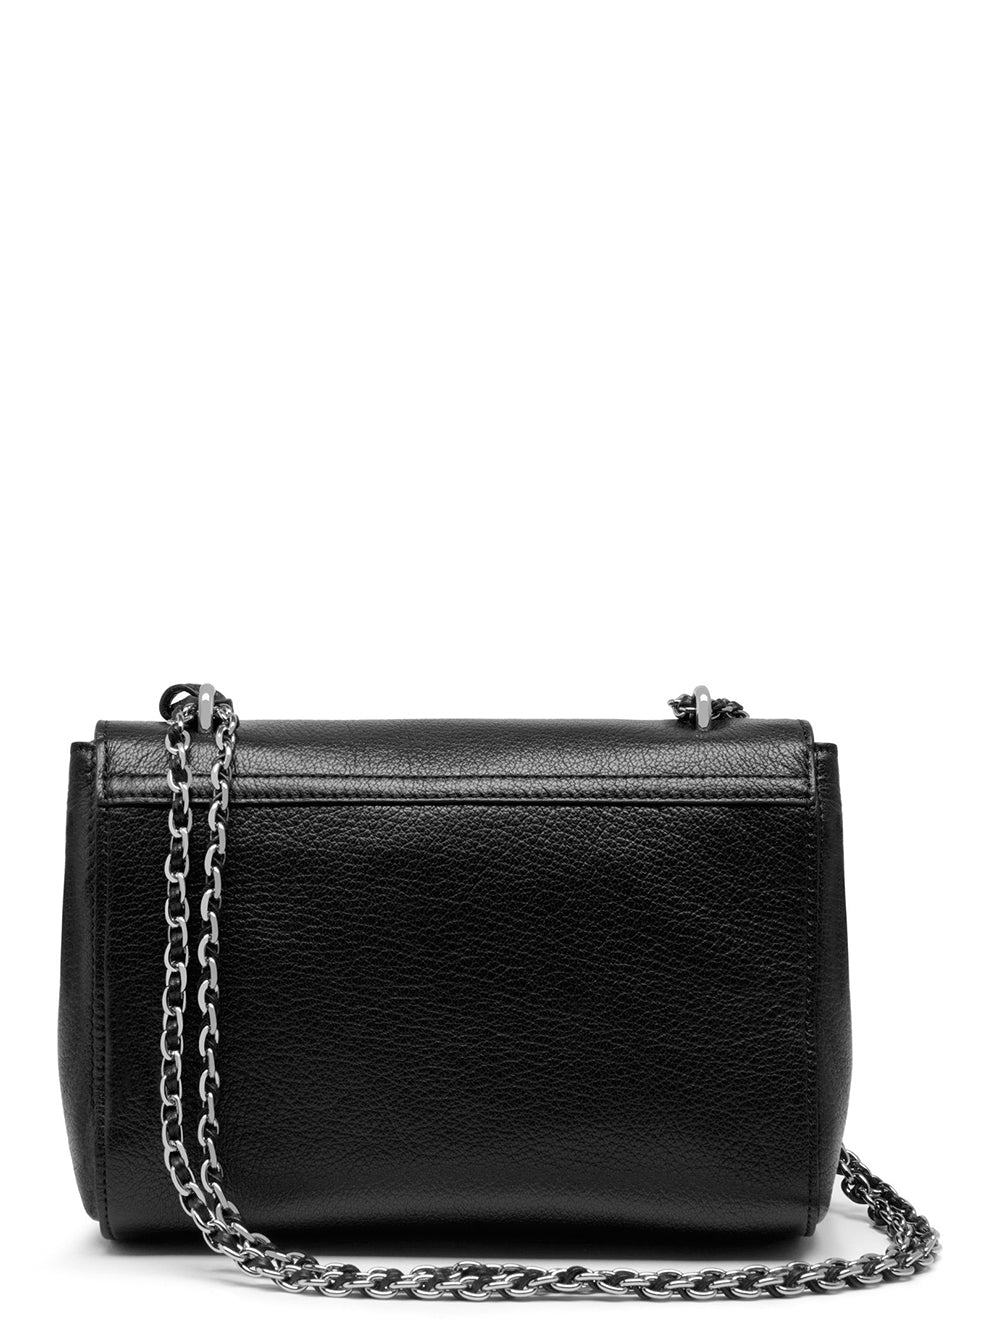 MULBERRY-Lily-Glossy-Goat-Leather-Black-2